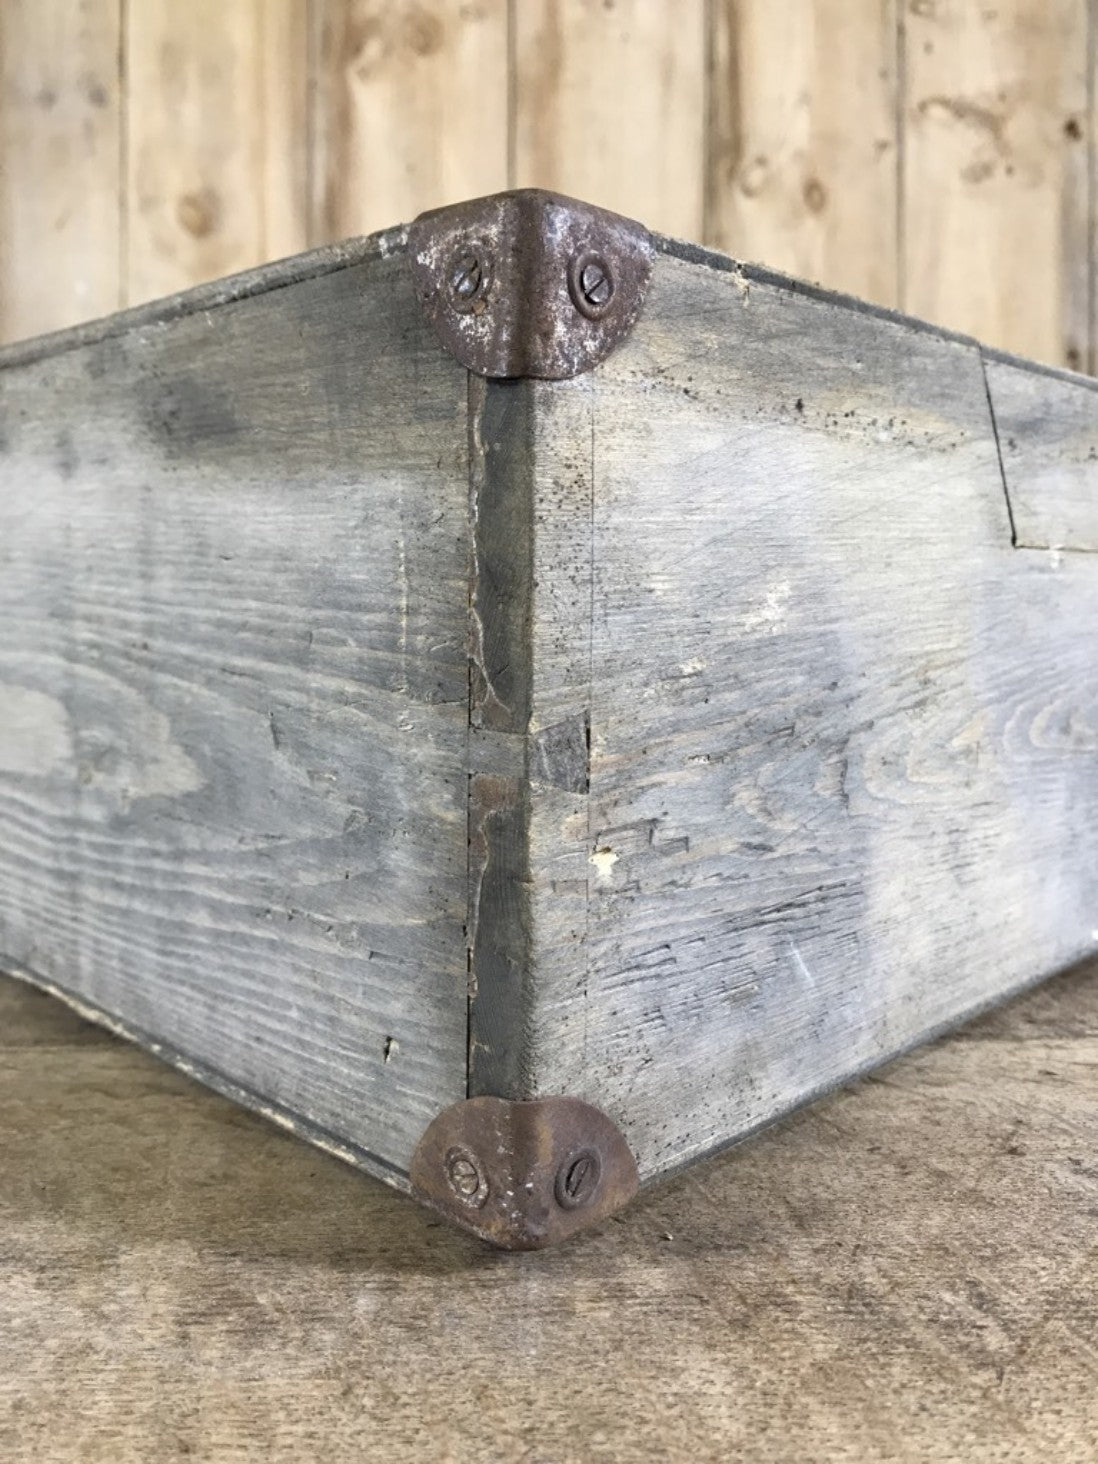 Reclaimed Stripped Pine & Ply Old Fashioned Tool Storage Box